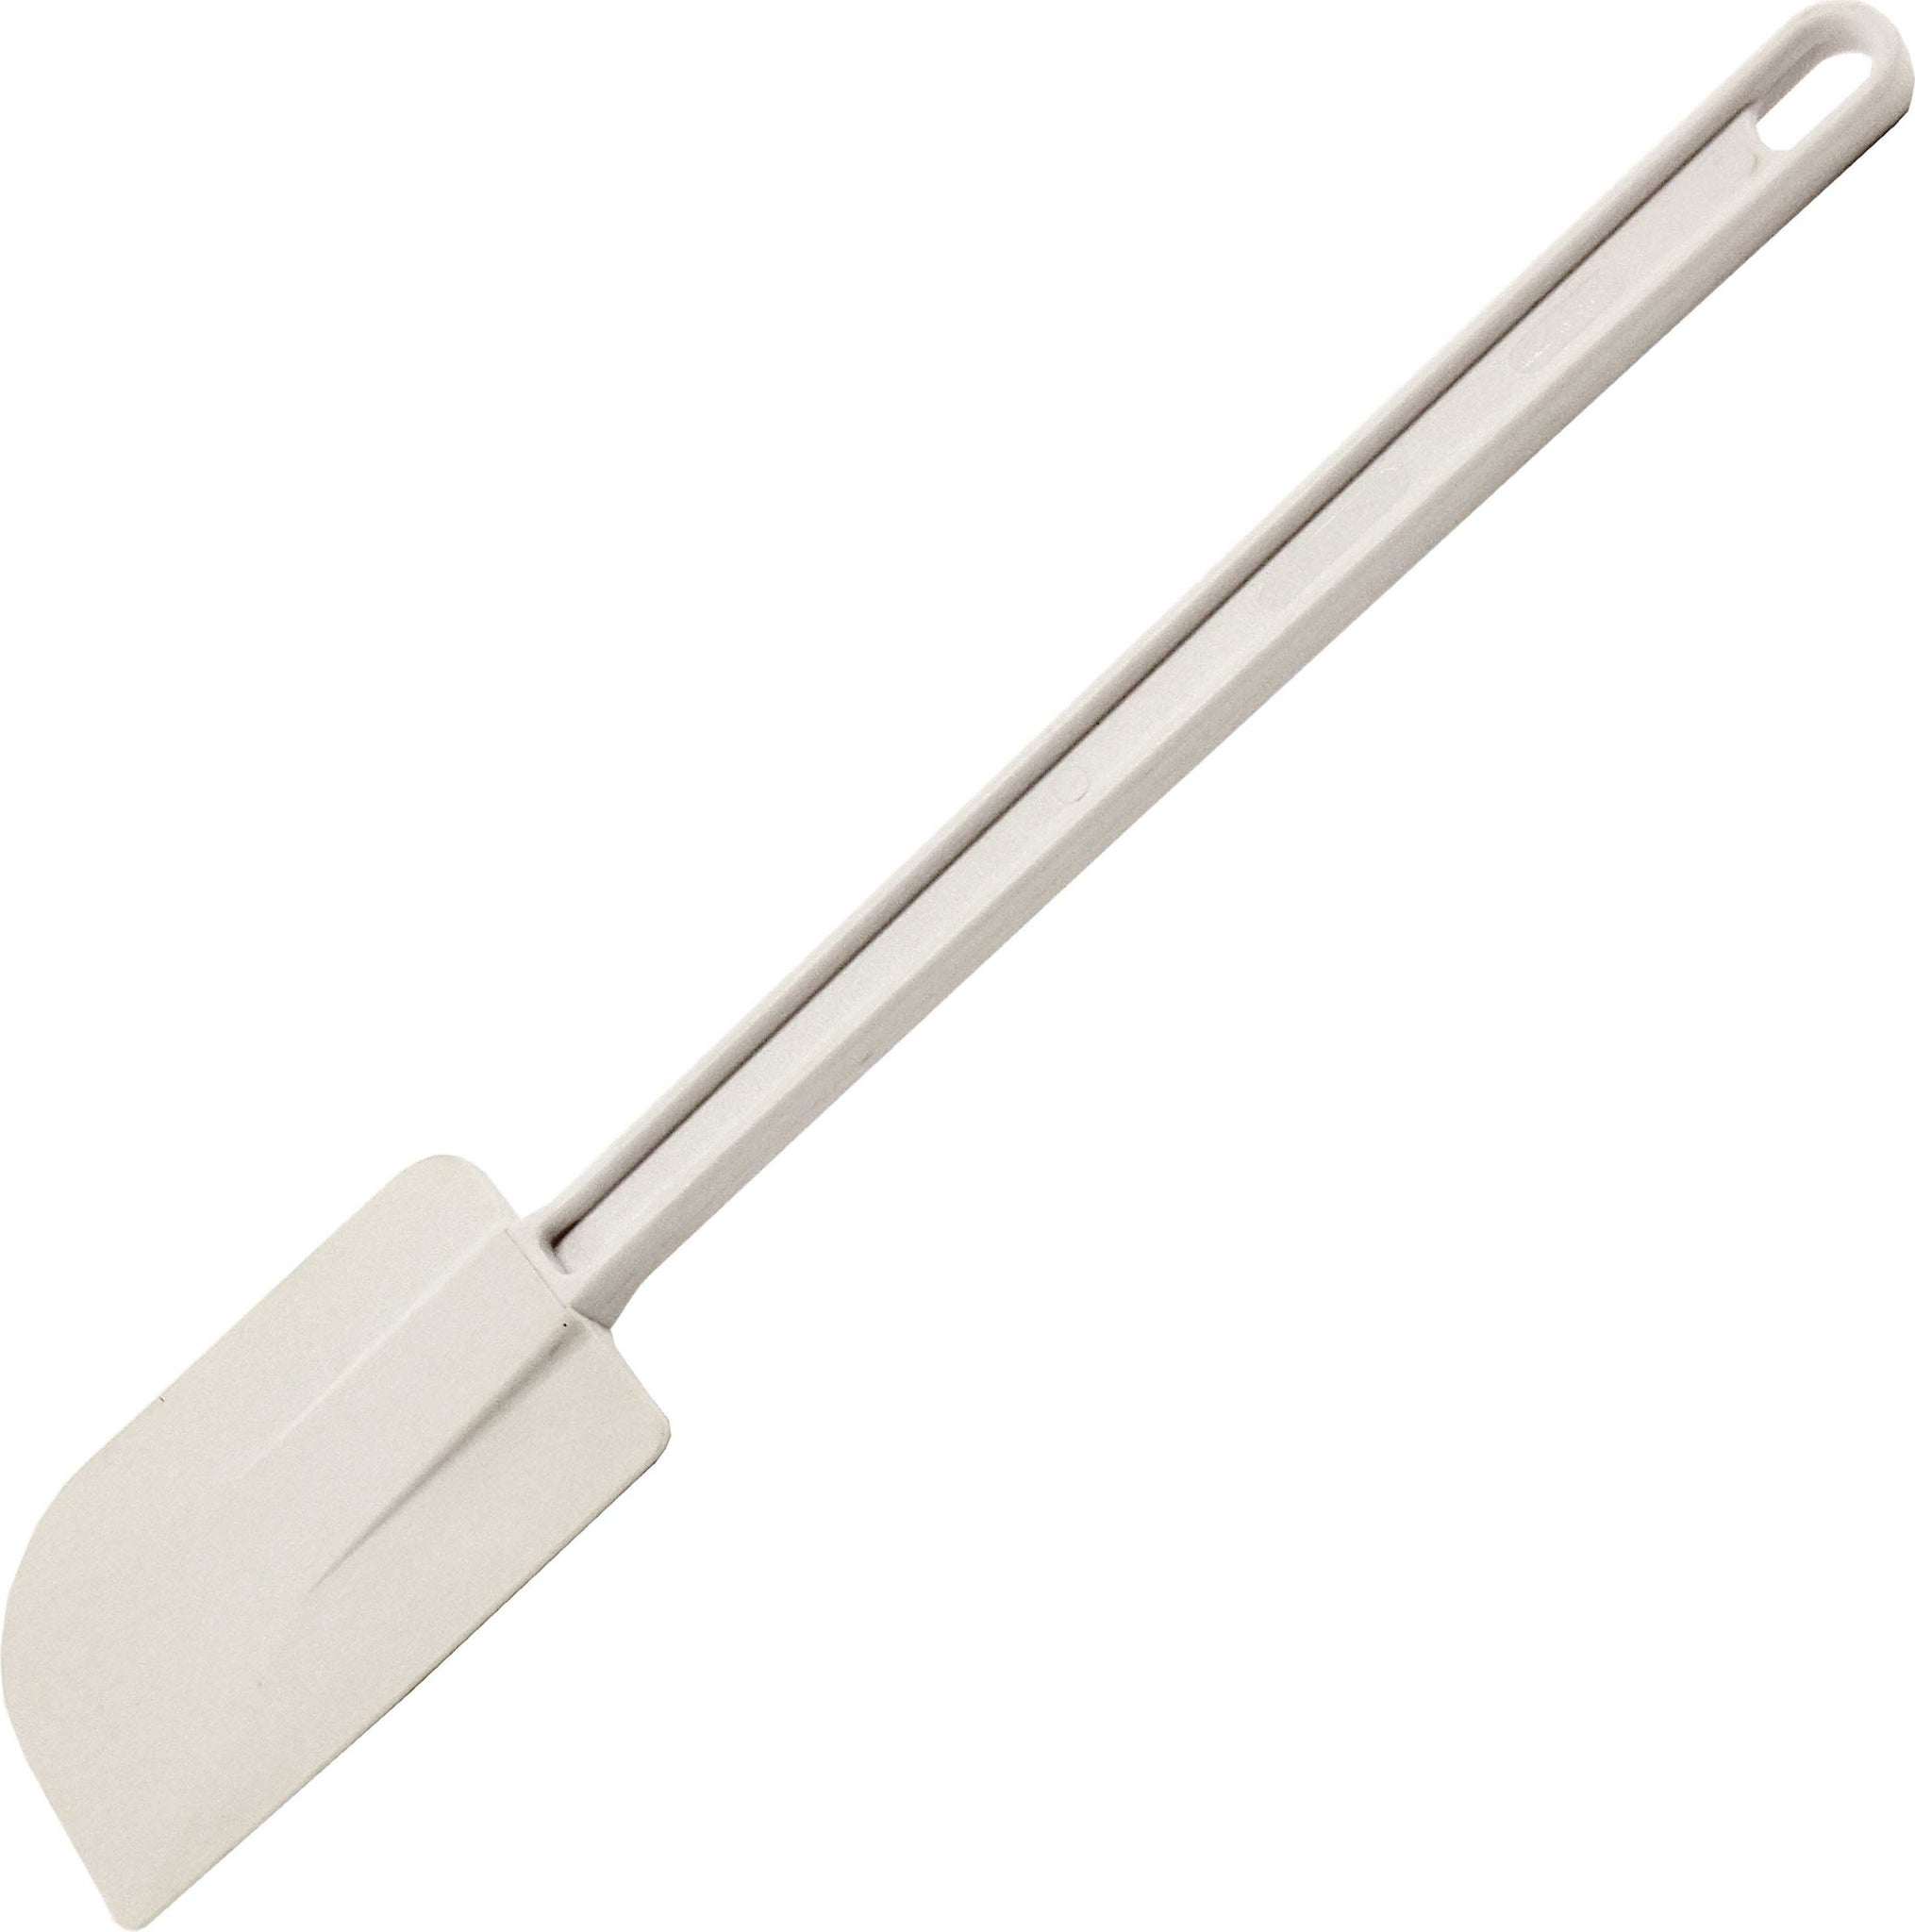 Omcan - 14” White Rubber Spatula with Flat Blade, 100/cs - 80031